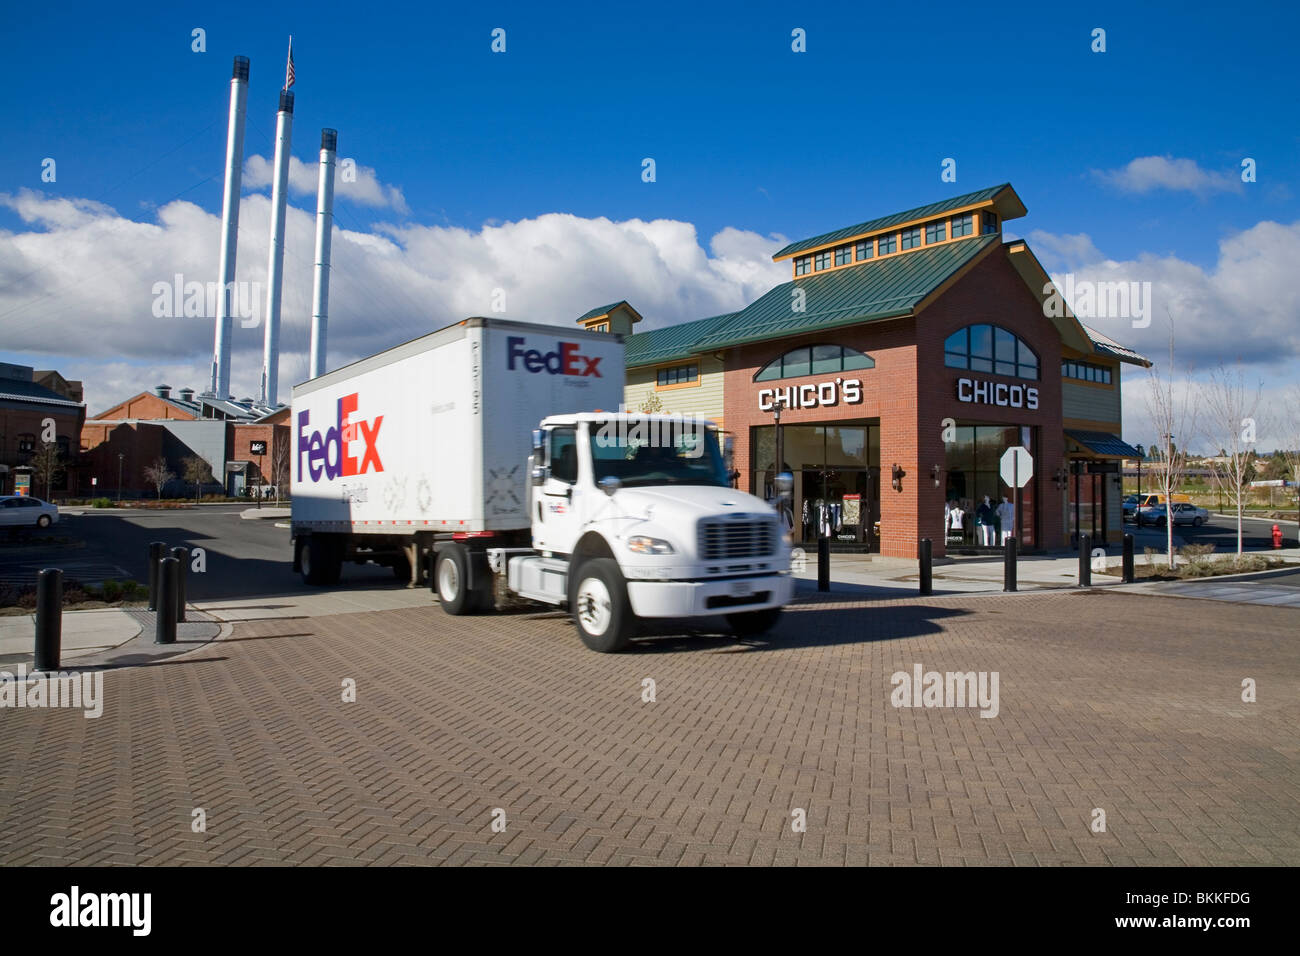 A federal express fedex delivery truck rolls out of a large shopping center in Bend, Oregon Stock Photo